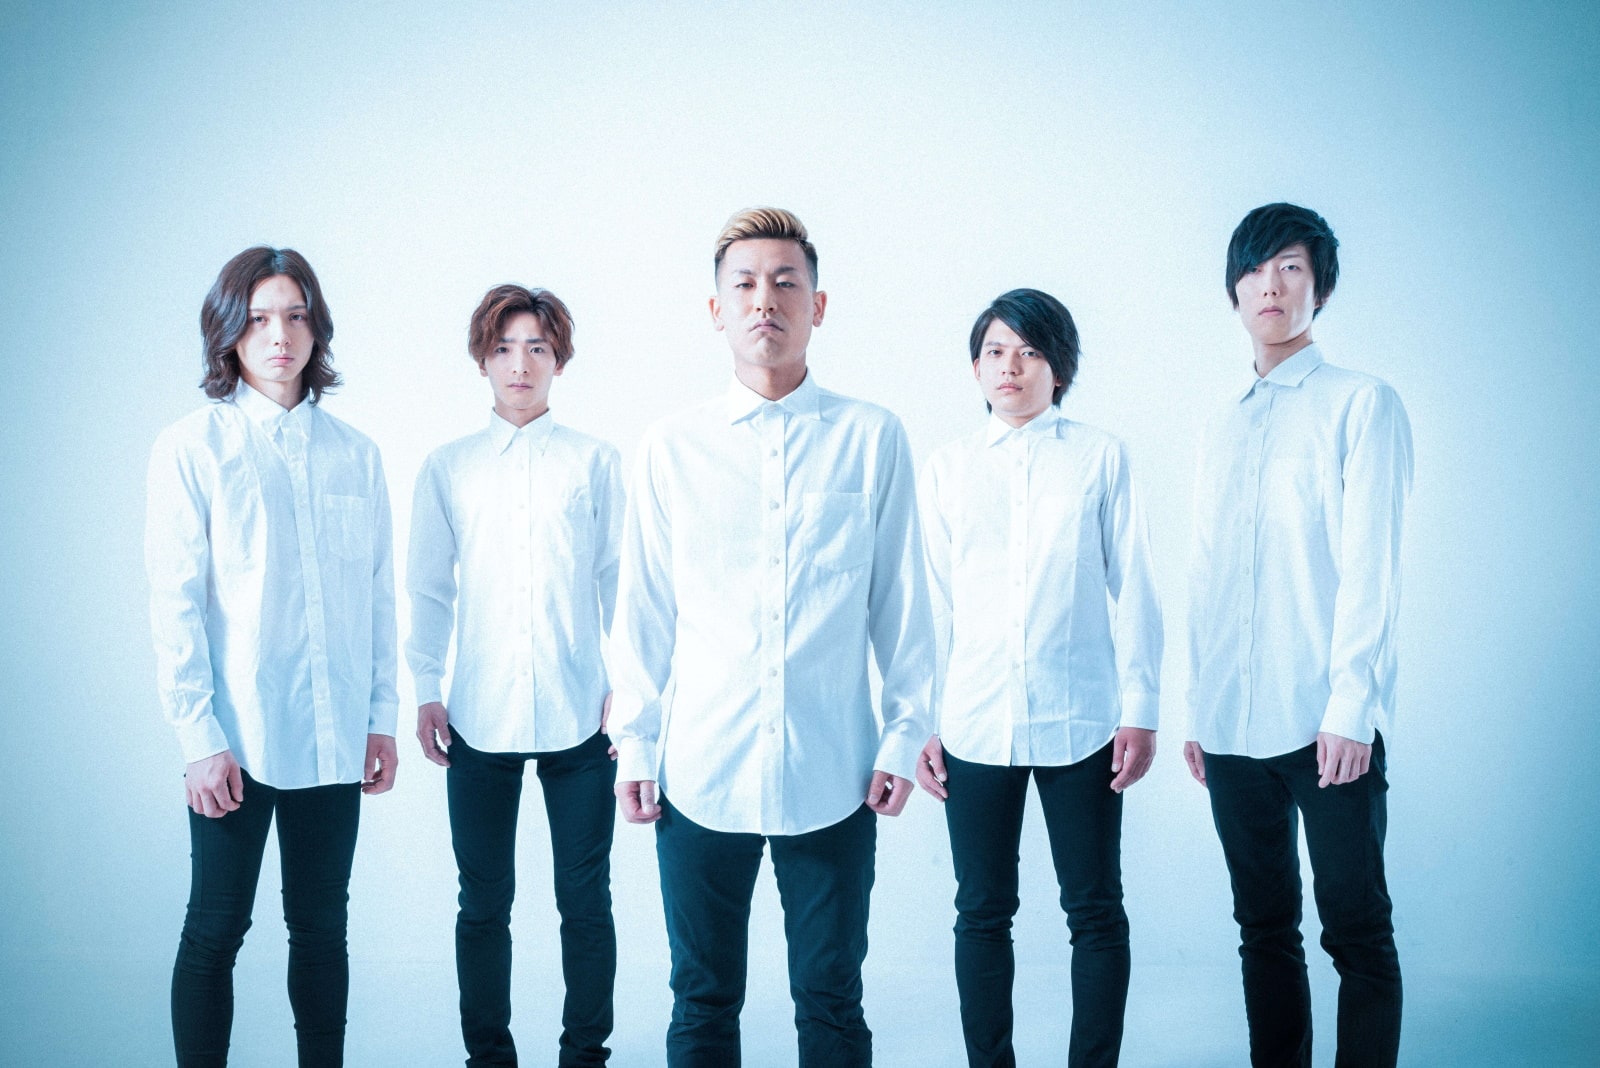 Tokyo melodic metalcore act SAILING BEFORE THE WIND